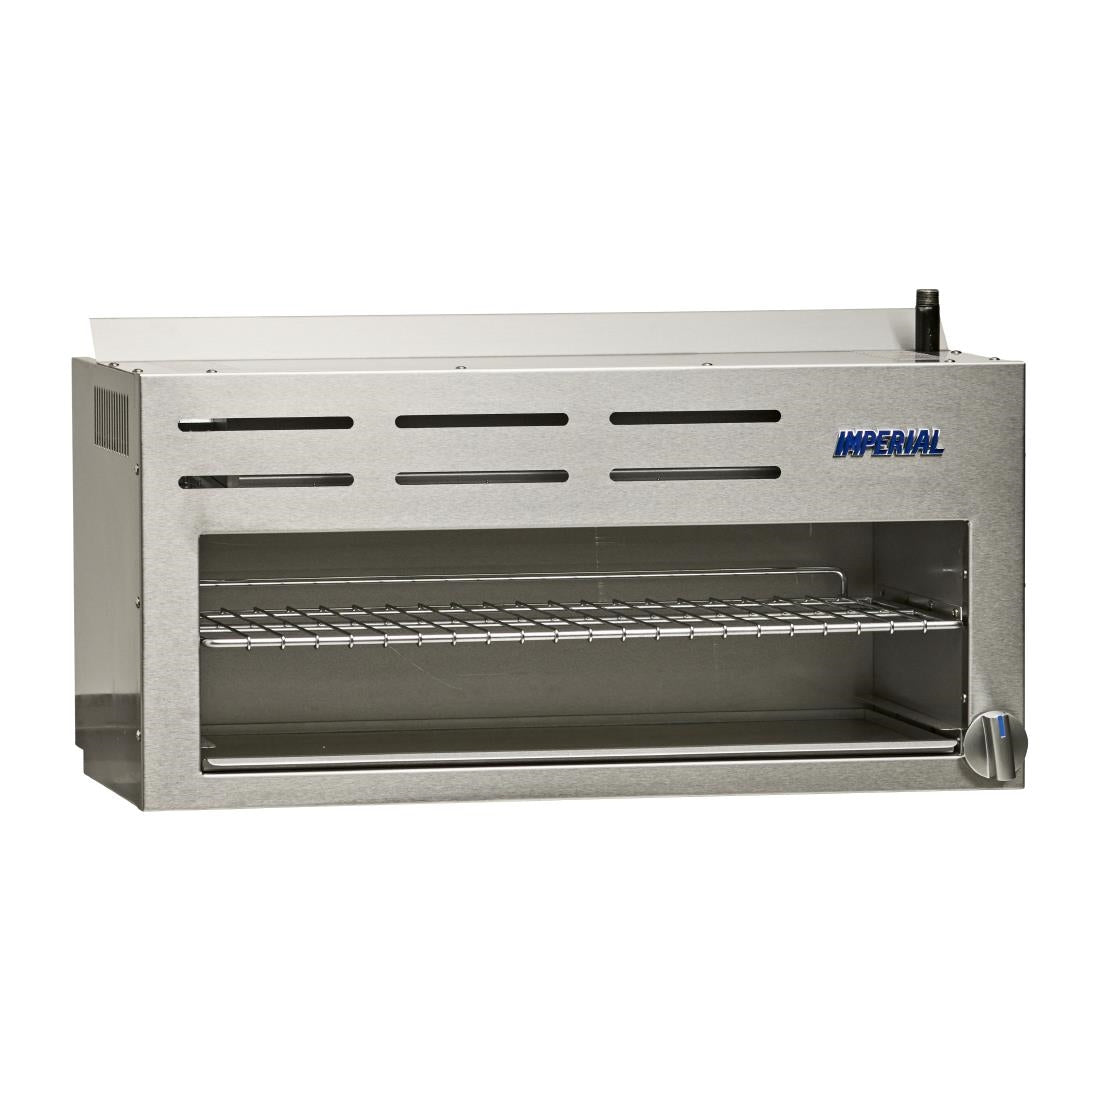 FX048 Imperial ICMA36 Infrared Cheese Melter Grill JD Catering Equipment Solutions Ltd